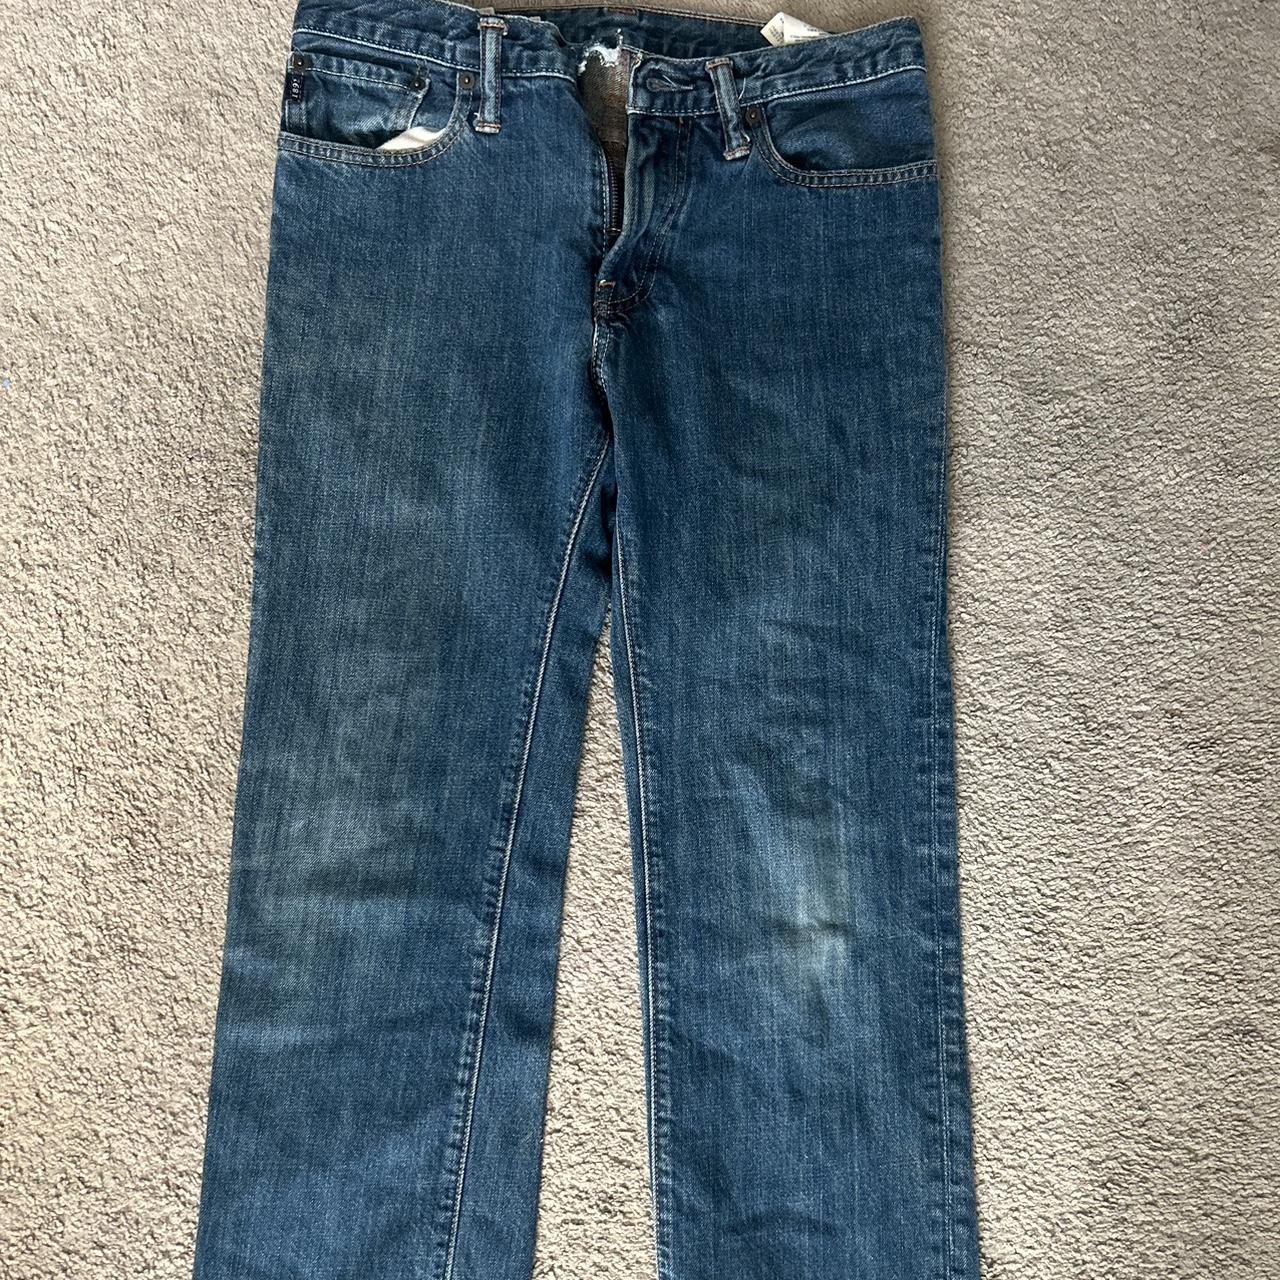 abercrombie & fitch baggy jeans 14 - Depop